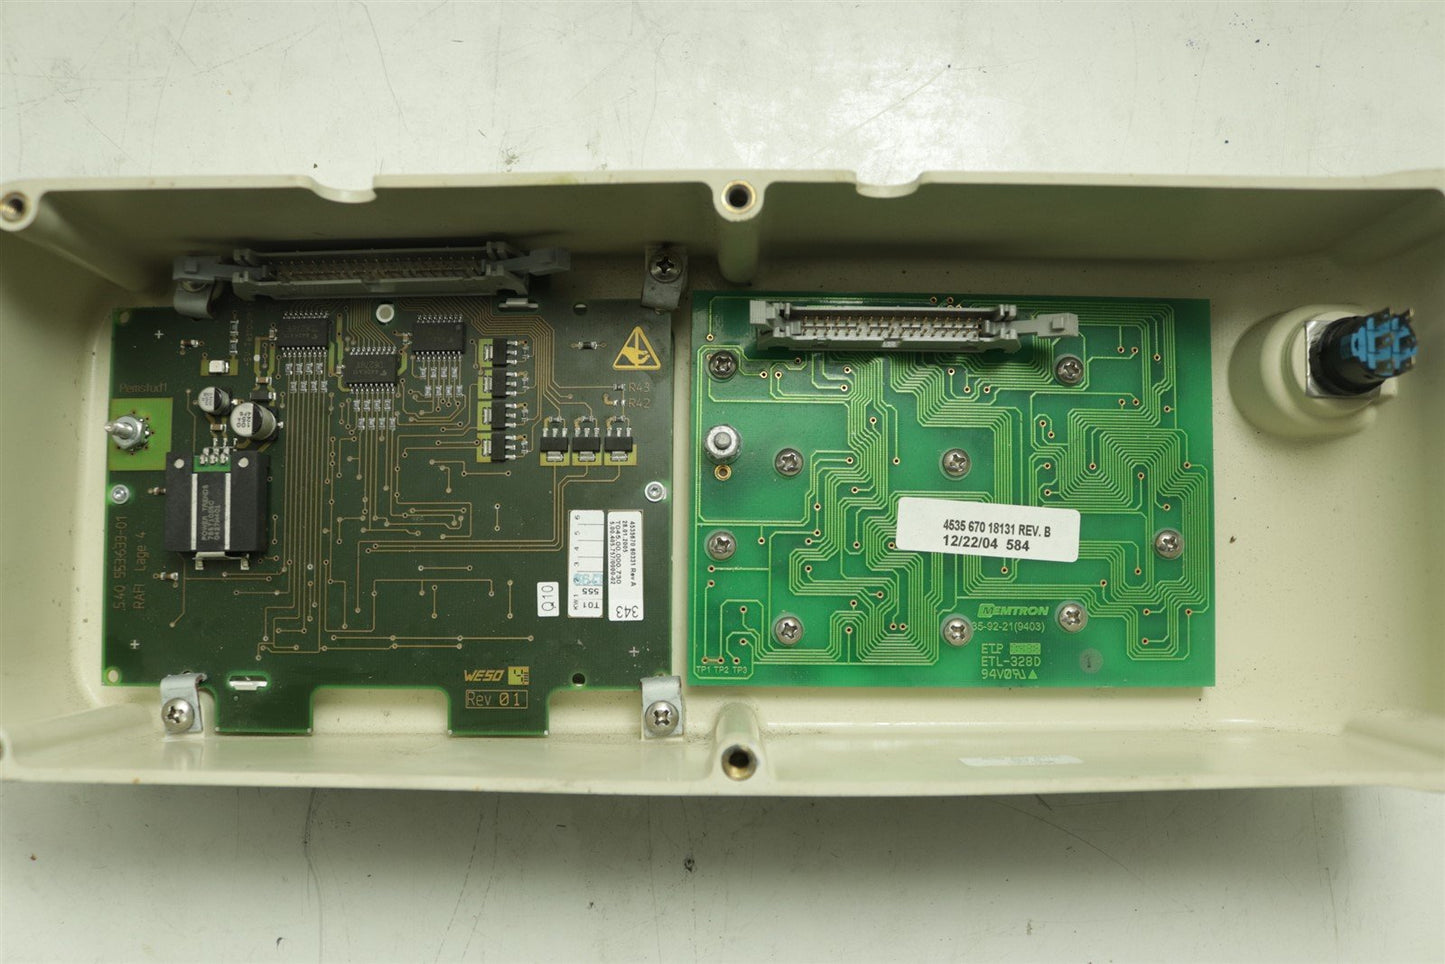 Philips CT Brilliance Assy LH Oper Panel and Display 453567069741